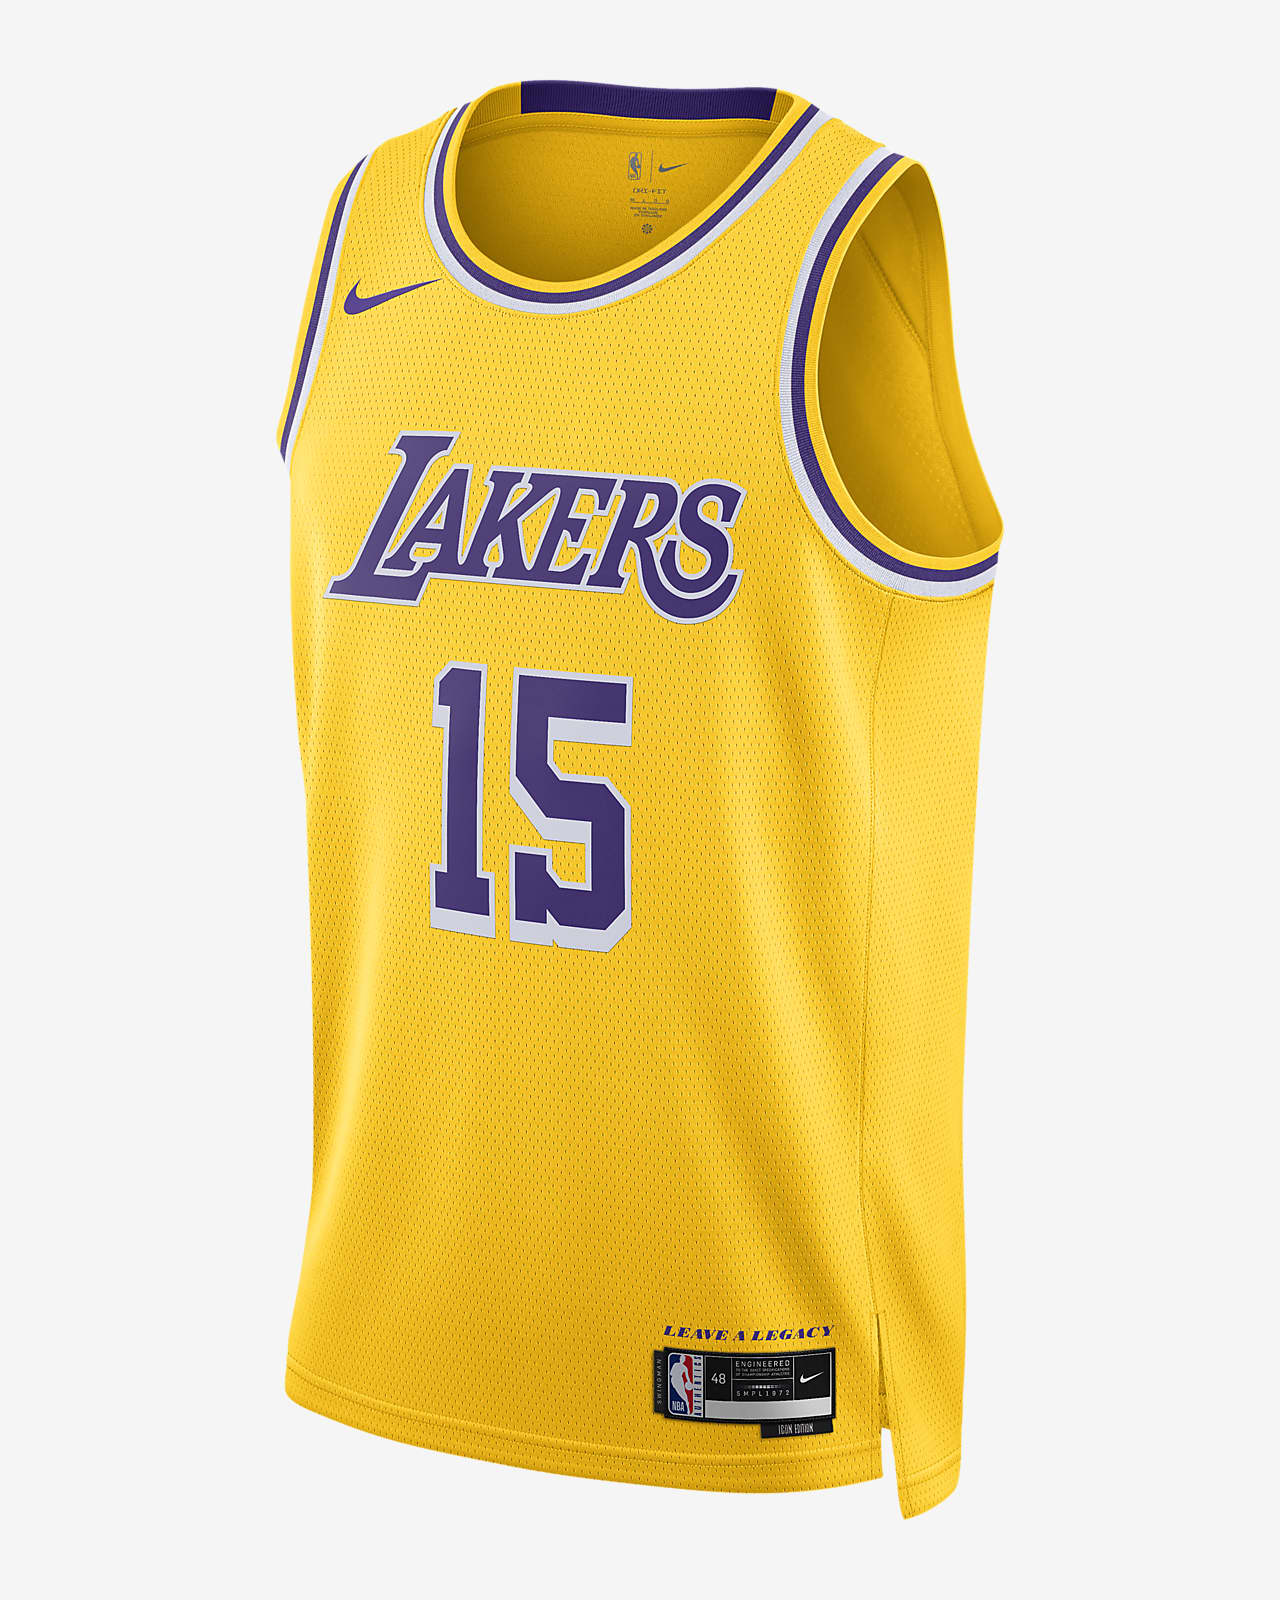 https://static.nike.com/a/images/t_PDP_1280_v1/f_auto,q_auto:eco/fa416cbe-be64-4295-8b57-fef628b5958f/los-angeles-lakers-icon-edition-2022-23-mens-dri-fit-nba-swingman-jersey-WGBhtS.png